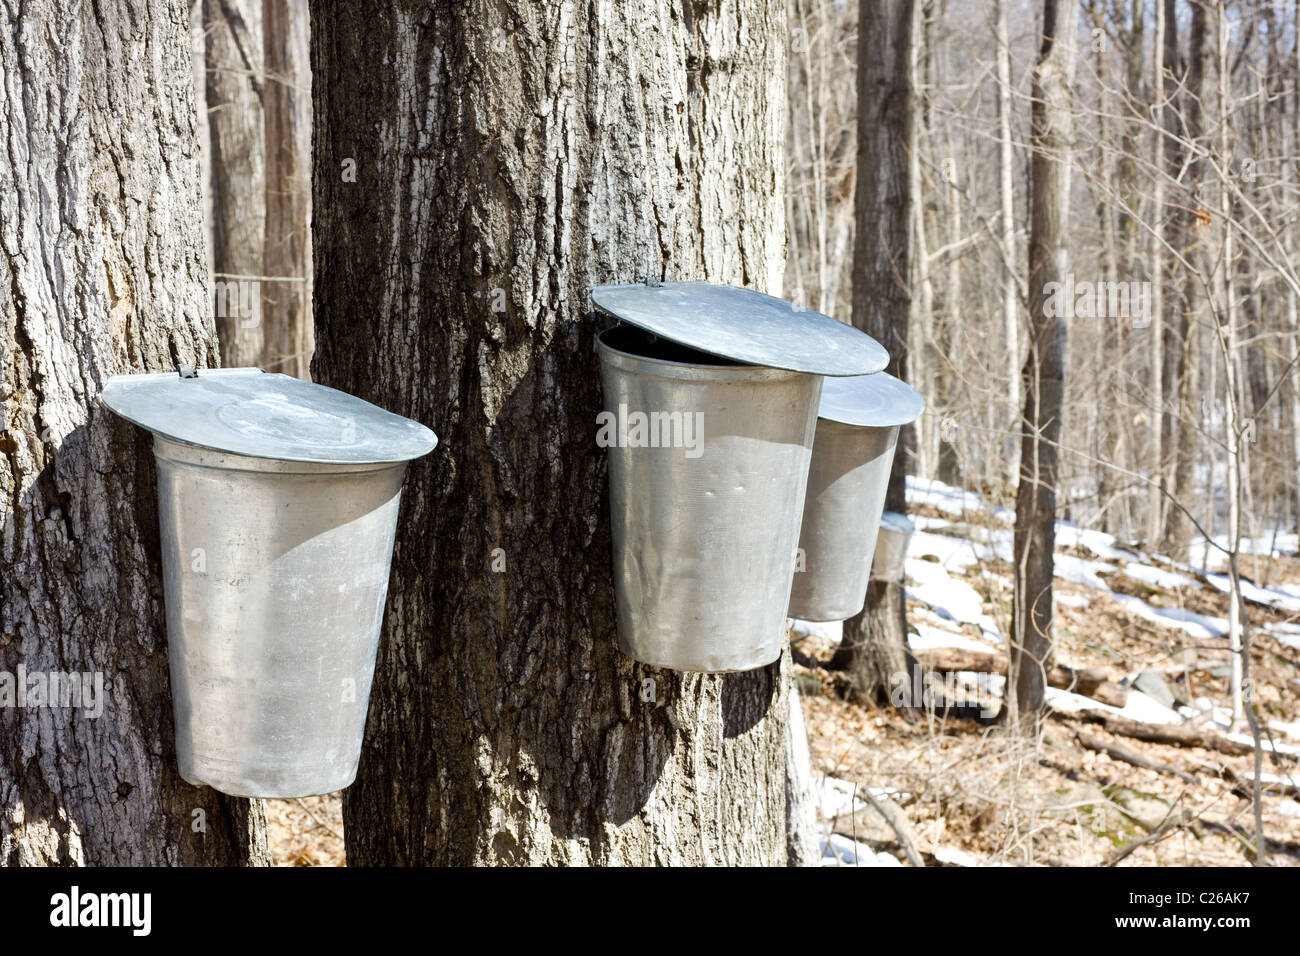 Buckets collecting sap from maple trees for production of maple syrup Stock Photo